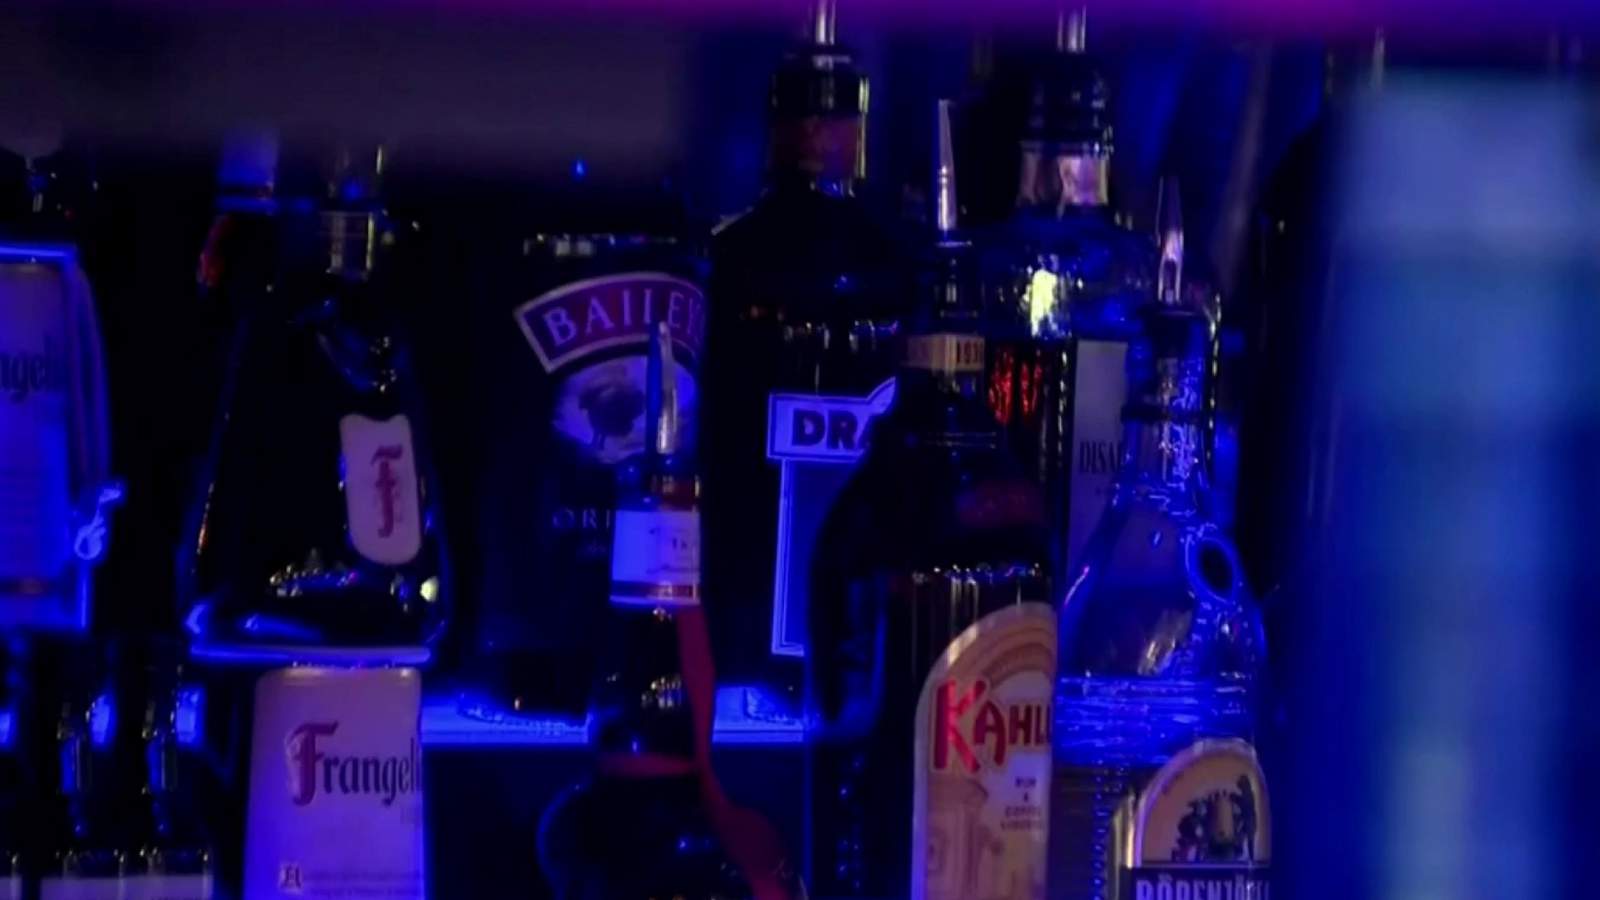 2 Port Huron stores sell alcohol to underage police decoys during sting involving 30 businesses